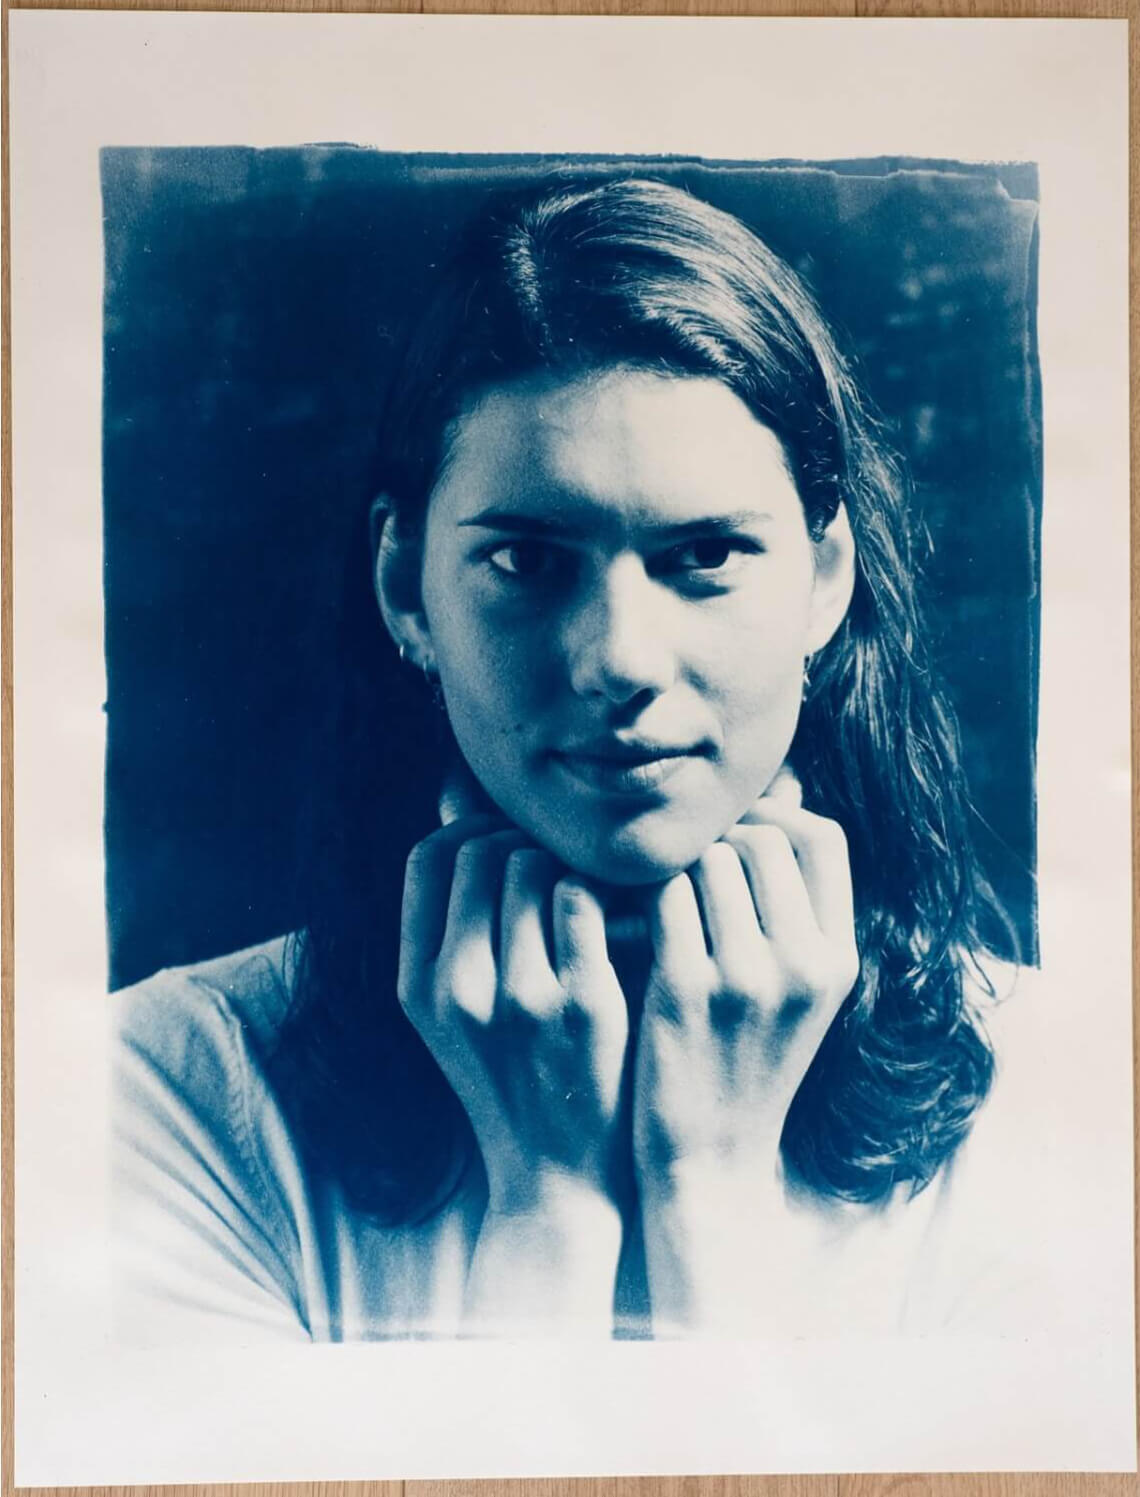 Portrait in blue. 65cm cyanotype enlargement from 6x7 negative printed onto watercolour paper.